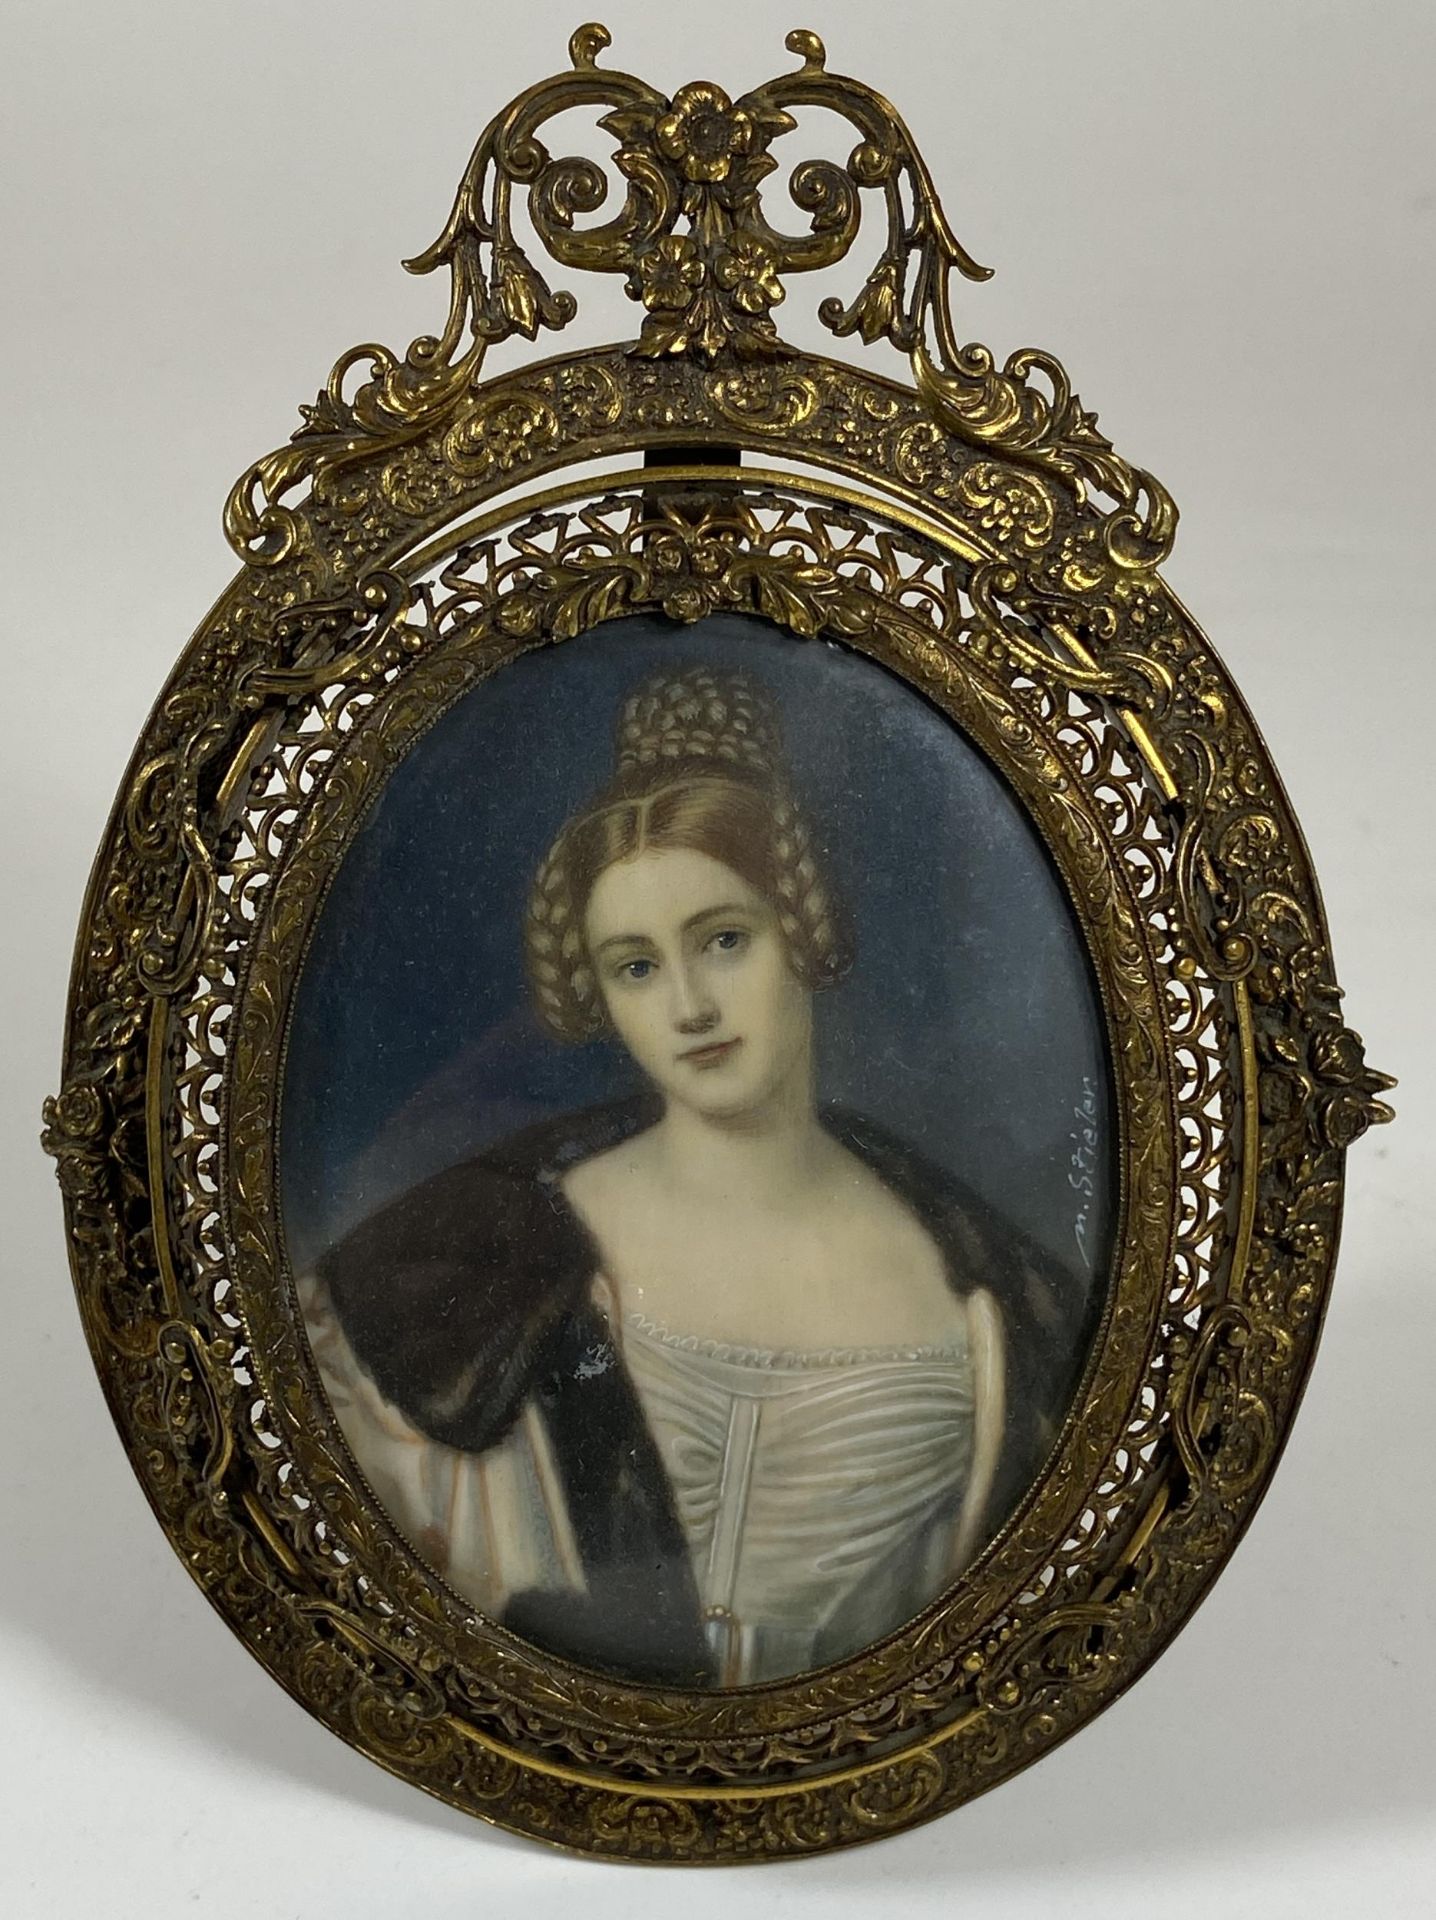 AN EARLY 19TH CENTURY HAND PAINTED PORTRAIT OF A LADY, SIGNED M.STIELER, IN ORNATE BRASS OVAL